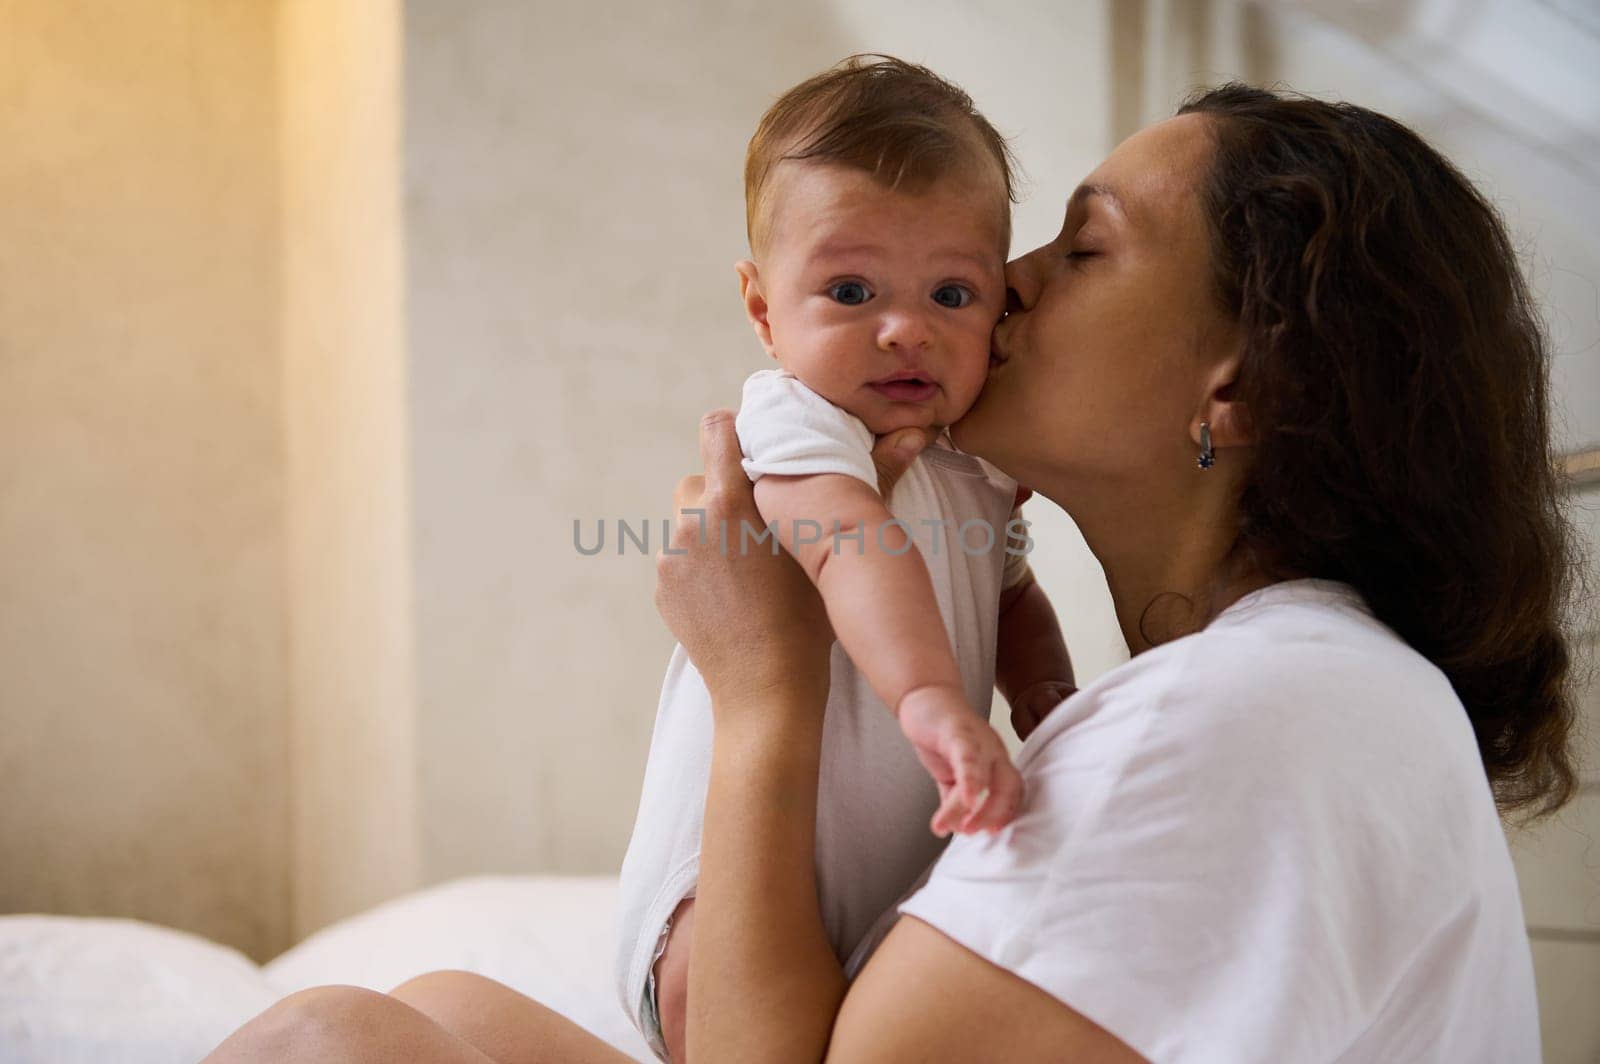 Authentic emotional portrait of a Caucasian cute baby boy, child 4 months old looking at camera while his mother cuddling and kissing him, enjoying happy time together. Babyhood. Baby care concept